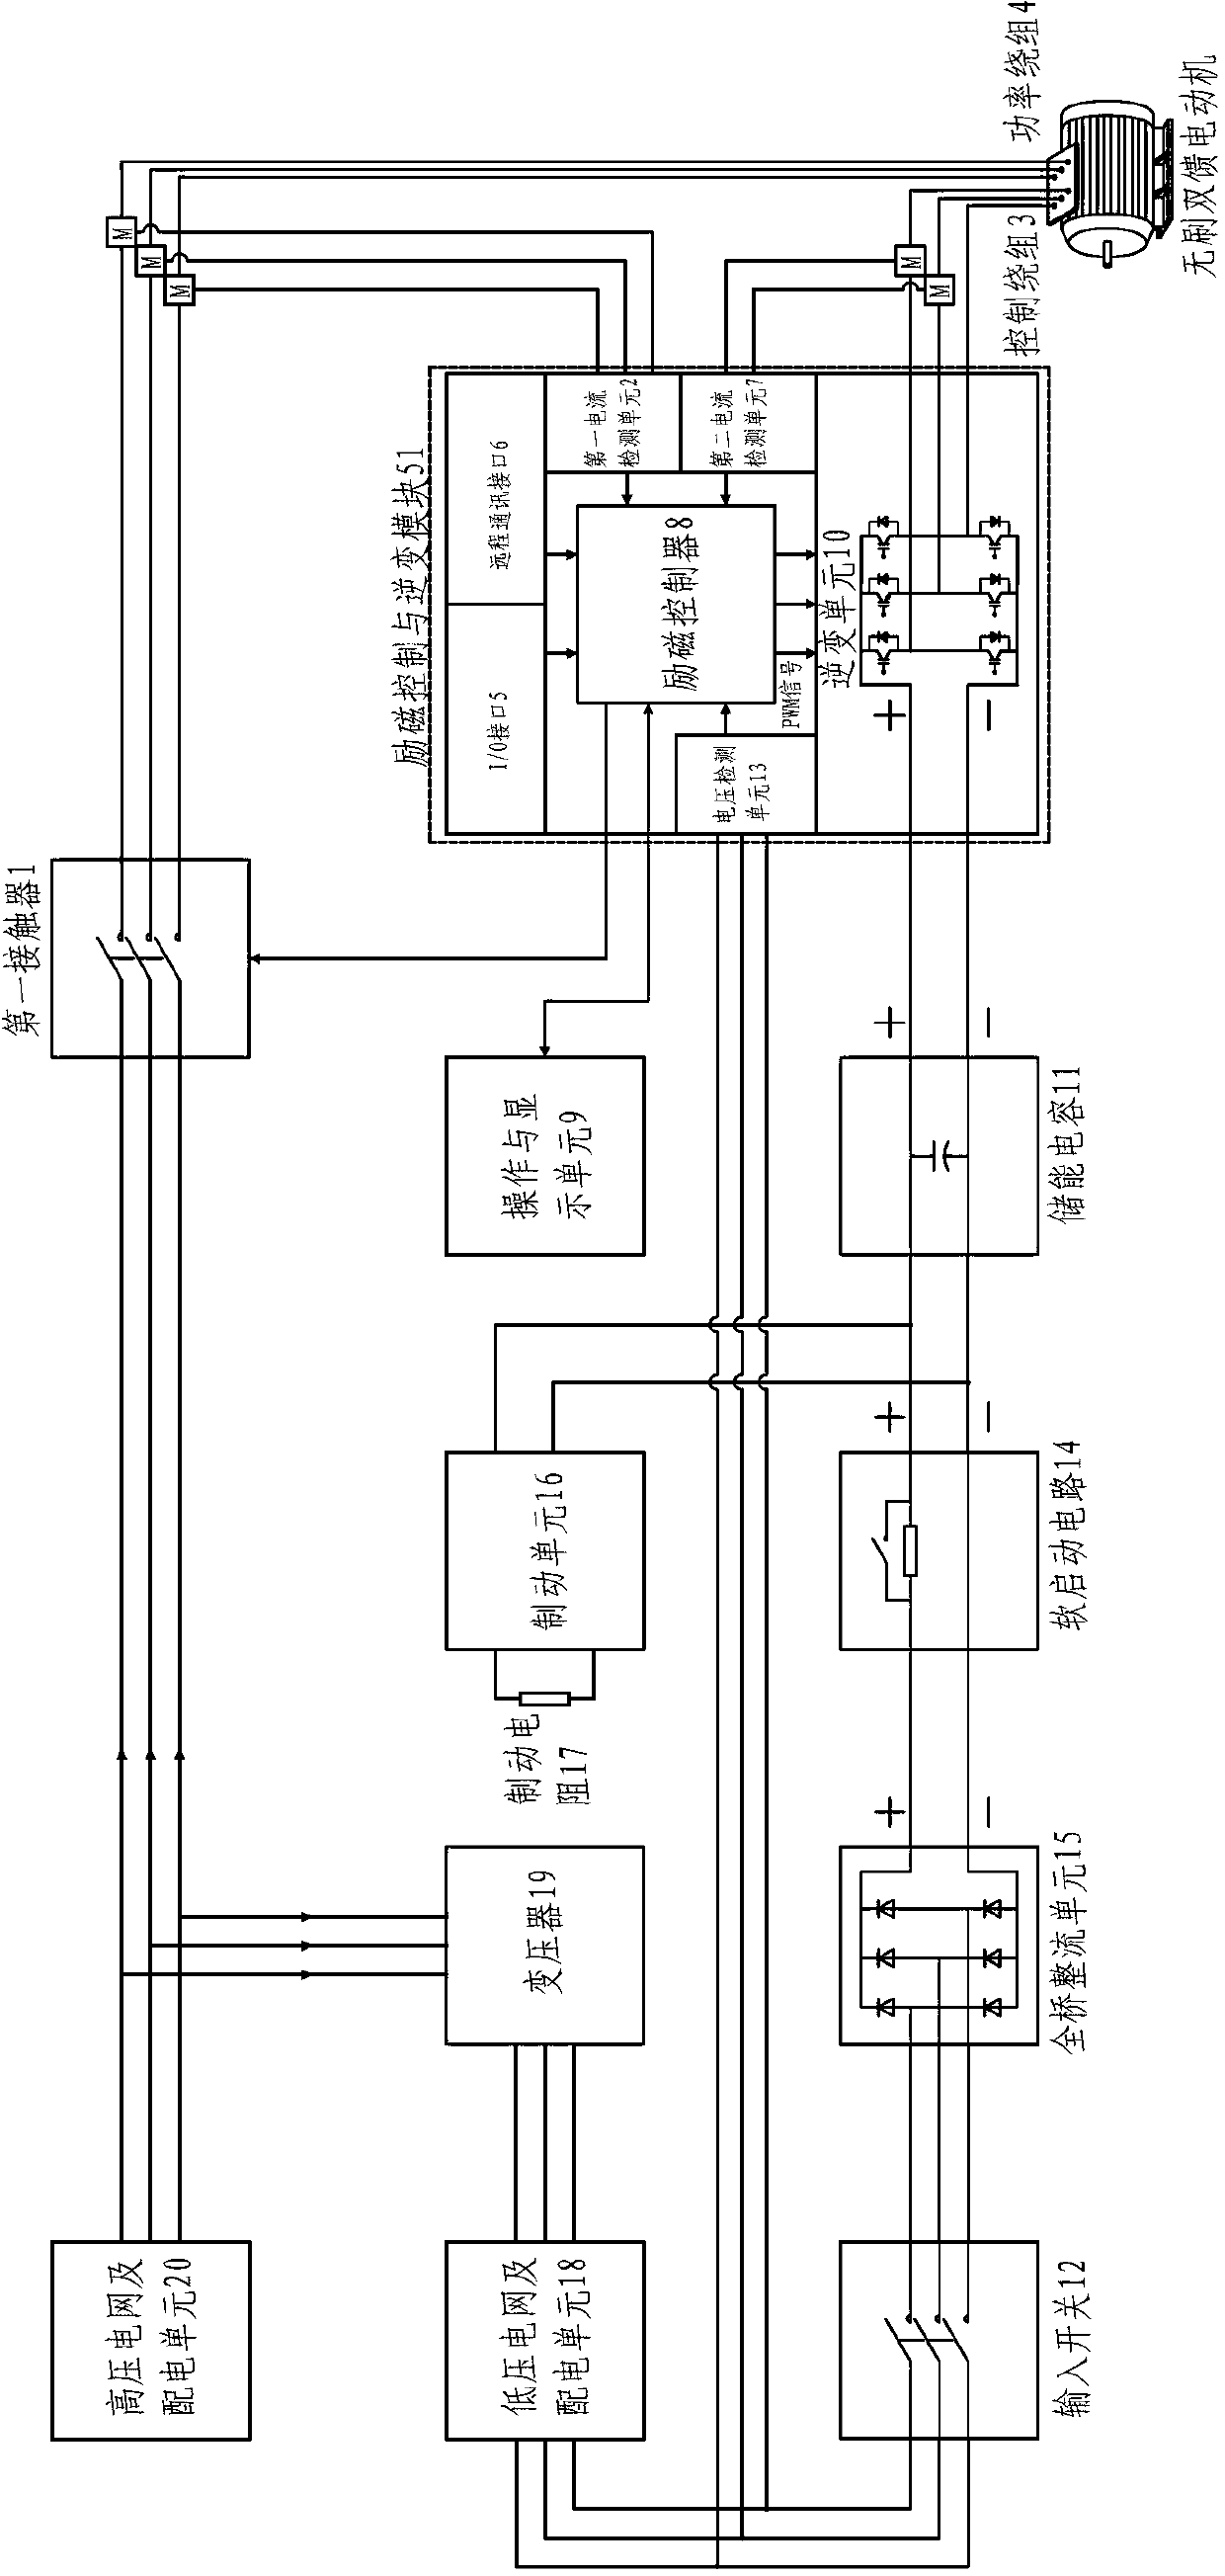 High-power brushless double fed motor variable frequency speed regulation system and control method